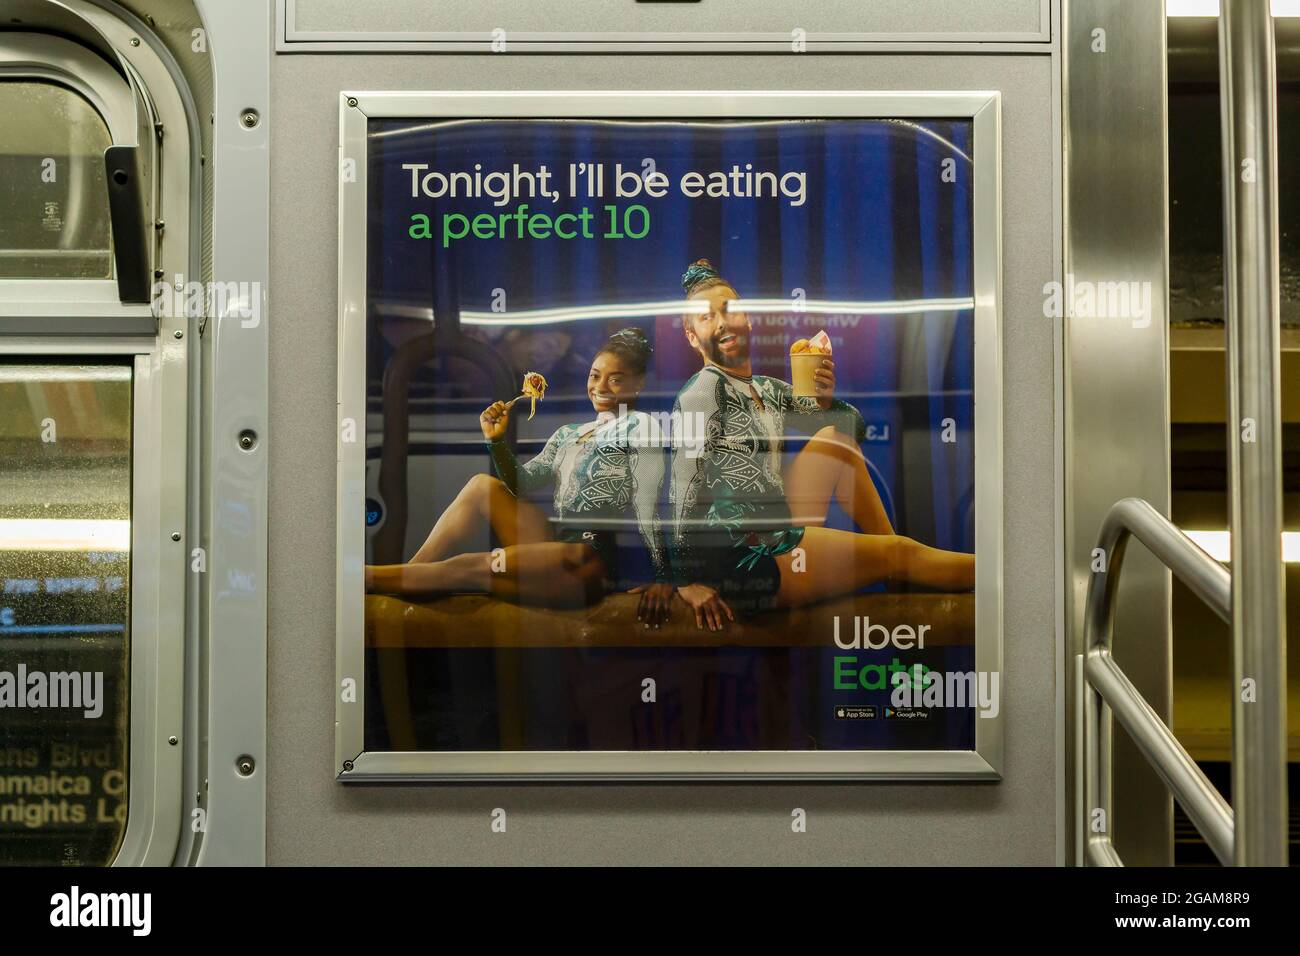 An advertisement for Uber Eats featuring gymnast Simone Biles, left, with amateur gymnast Jonathan Van Ness, in the subway in New York on Thursday, July 29, 2021. Uber Eats and the many other sponsors of Biles’ expressed their support for her after her decision to pull out of the individual, all-around gymnastics competition at the Tokyo Olympics.(© Richard B. Levine) Stock Photo